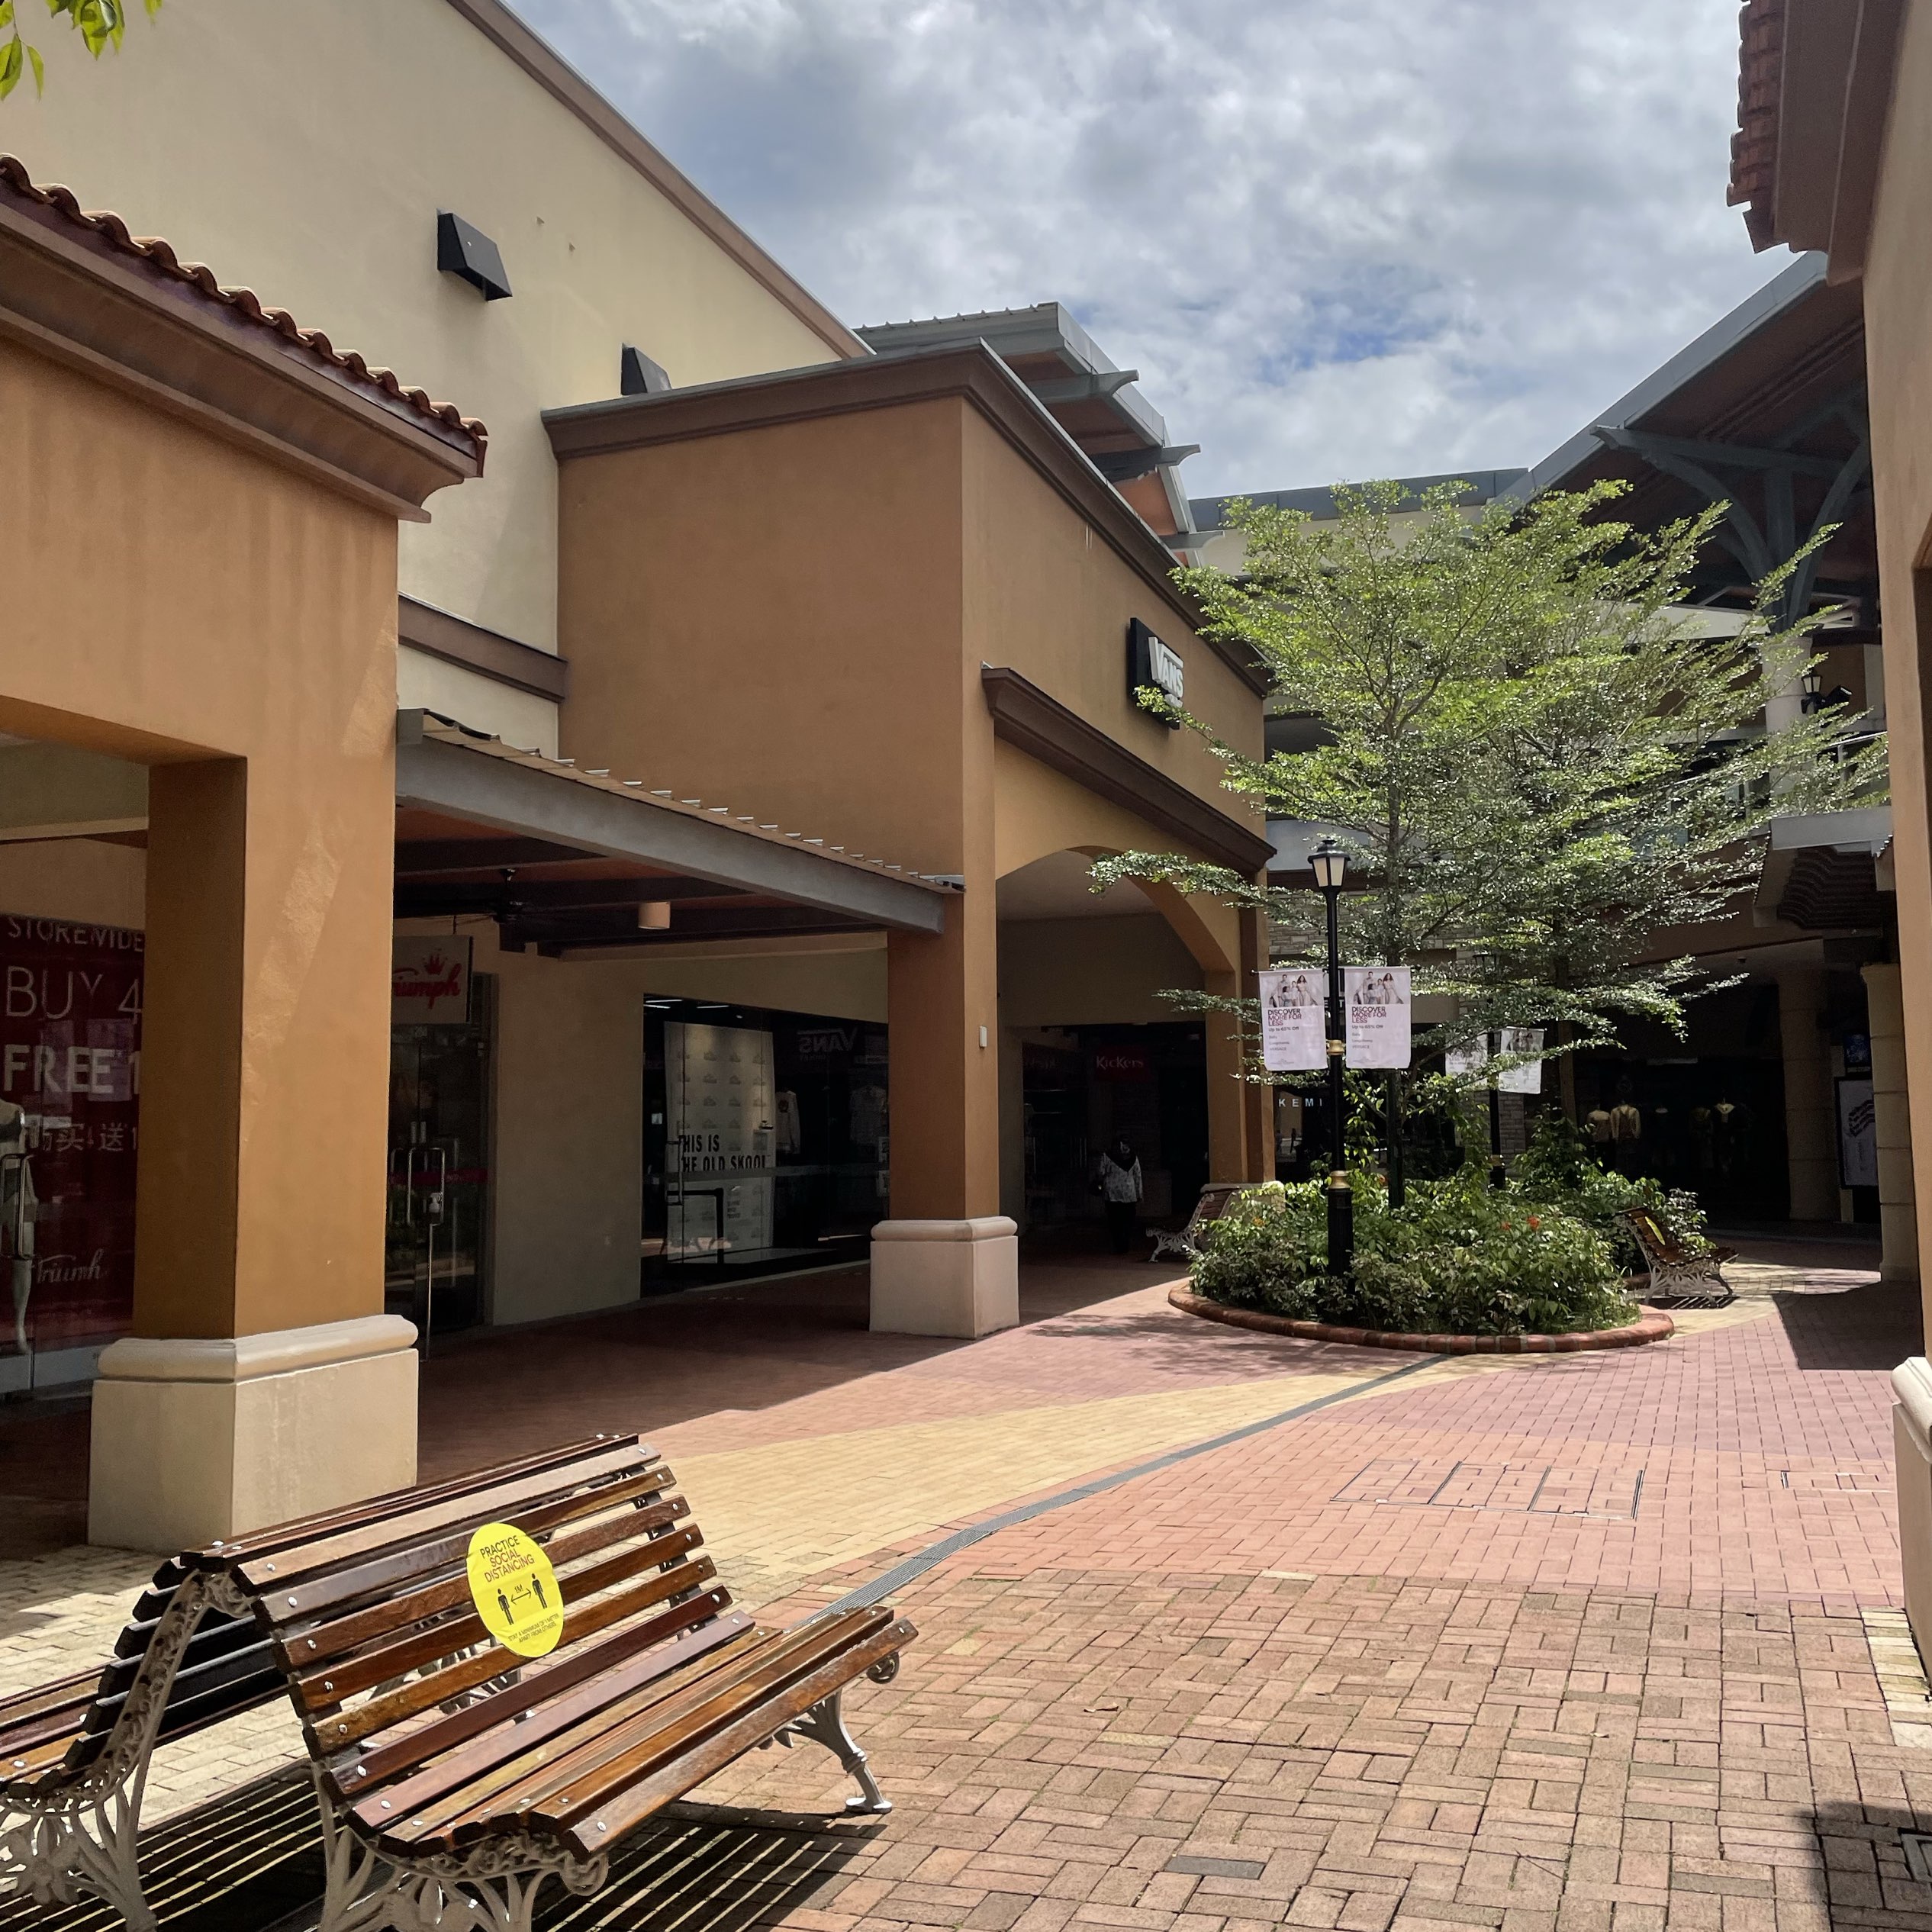 JOHOR PREMIUM OUTLET (JPO) SHOPPING SPREE AFTER 4 HOURS DRIVE: PINOY IN  MALAYSIA 